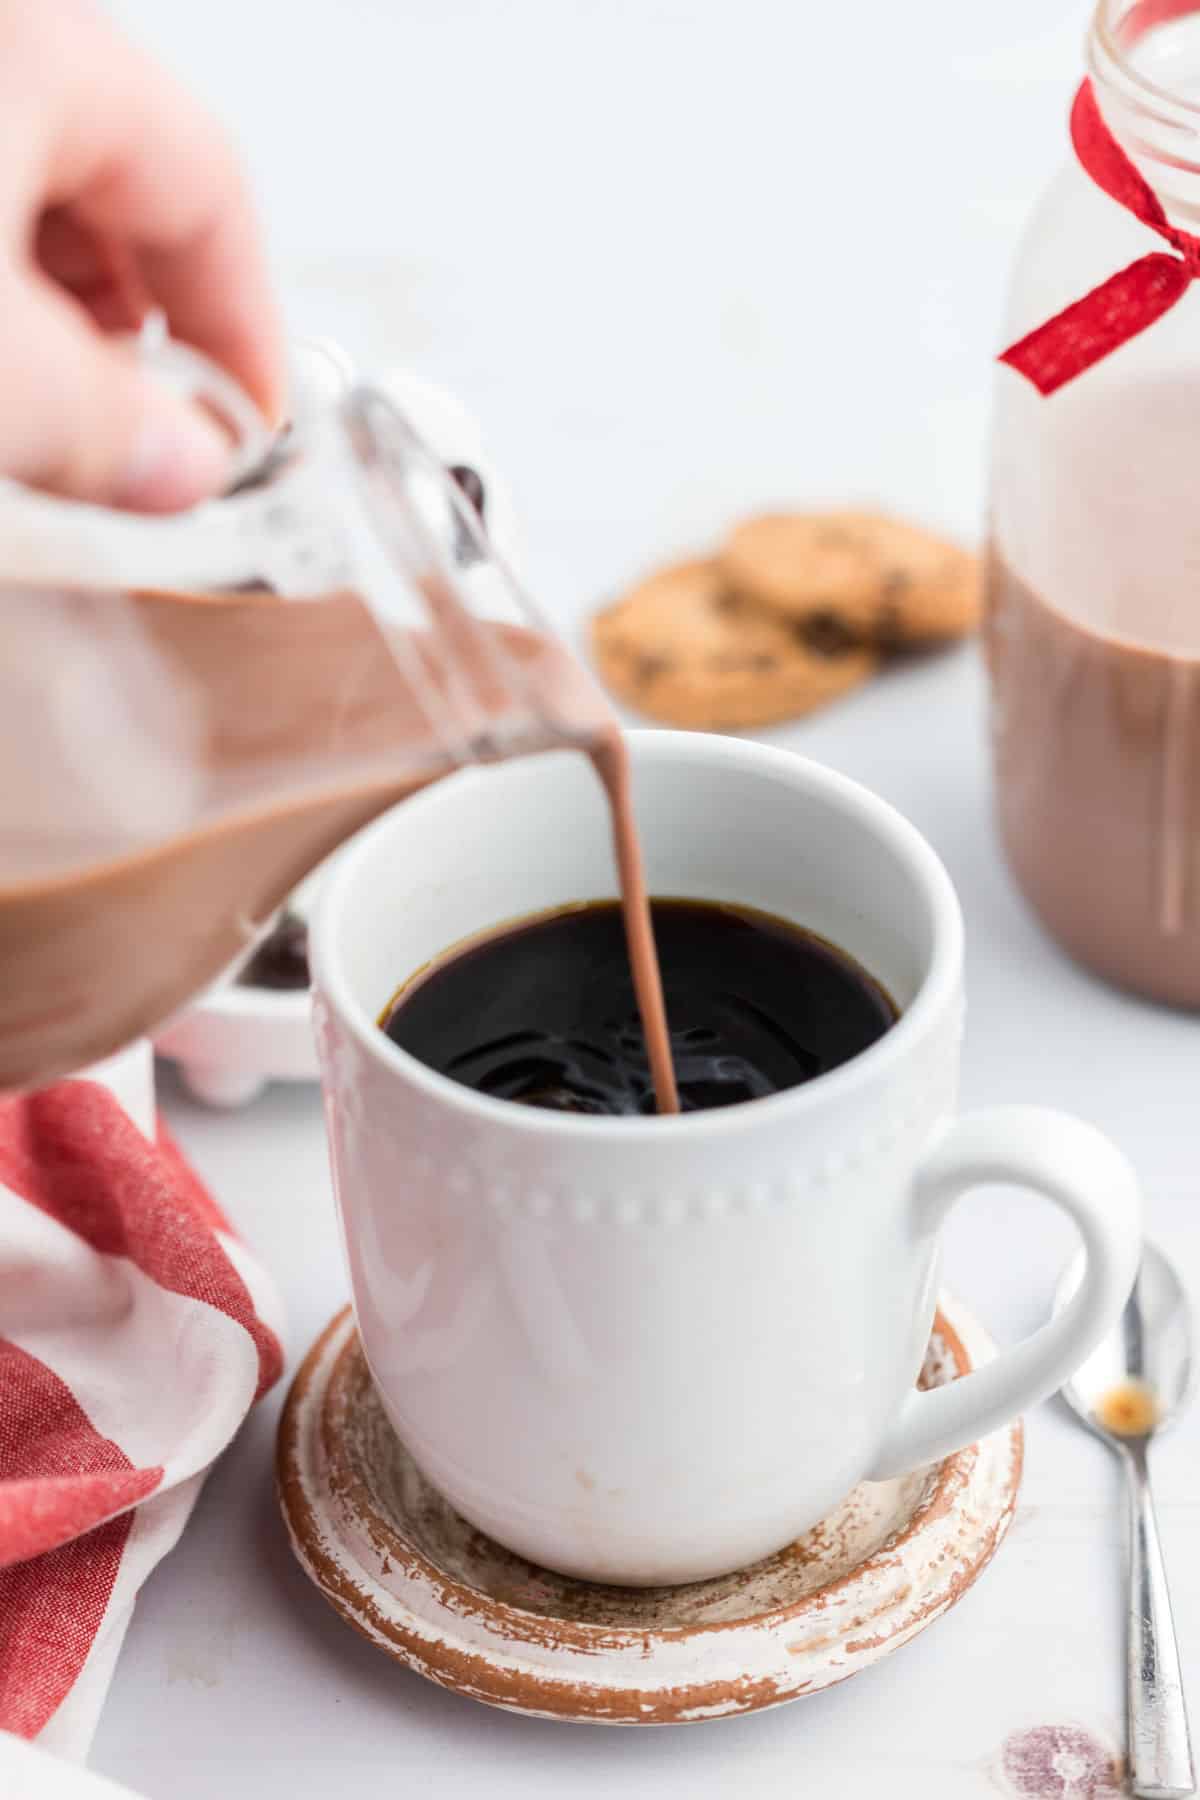 Try These Homemade Coffee Creamer Flavors For the Holidays!